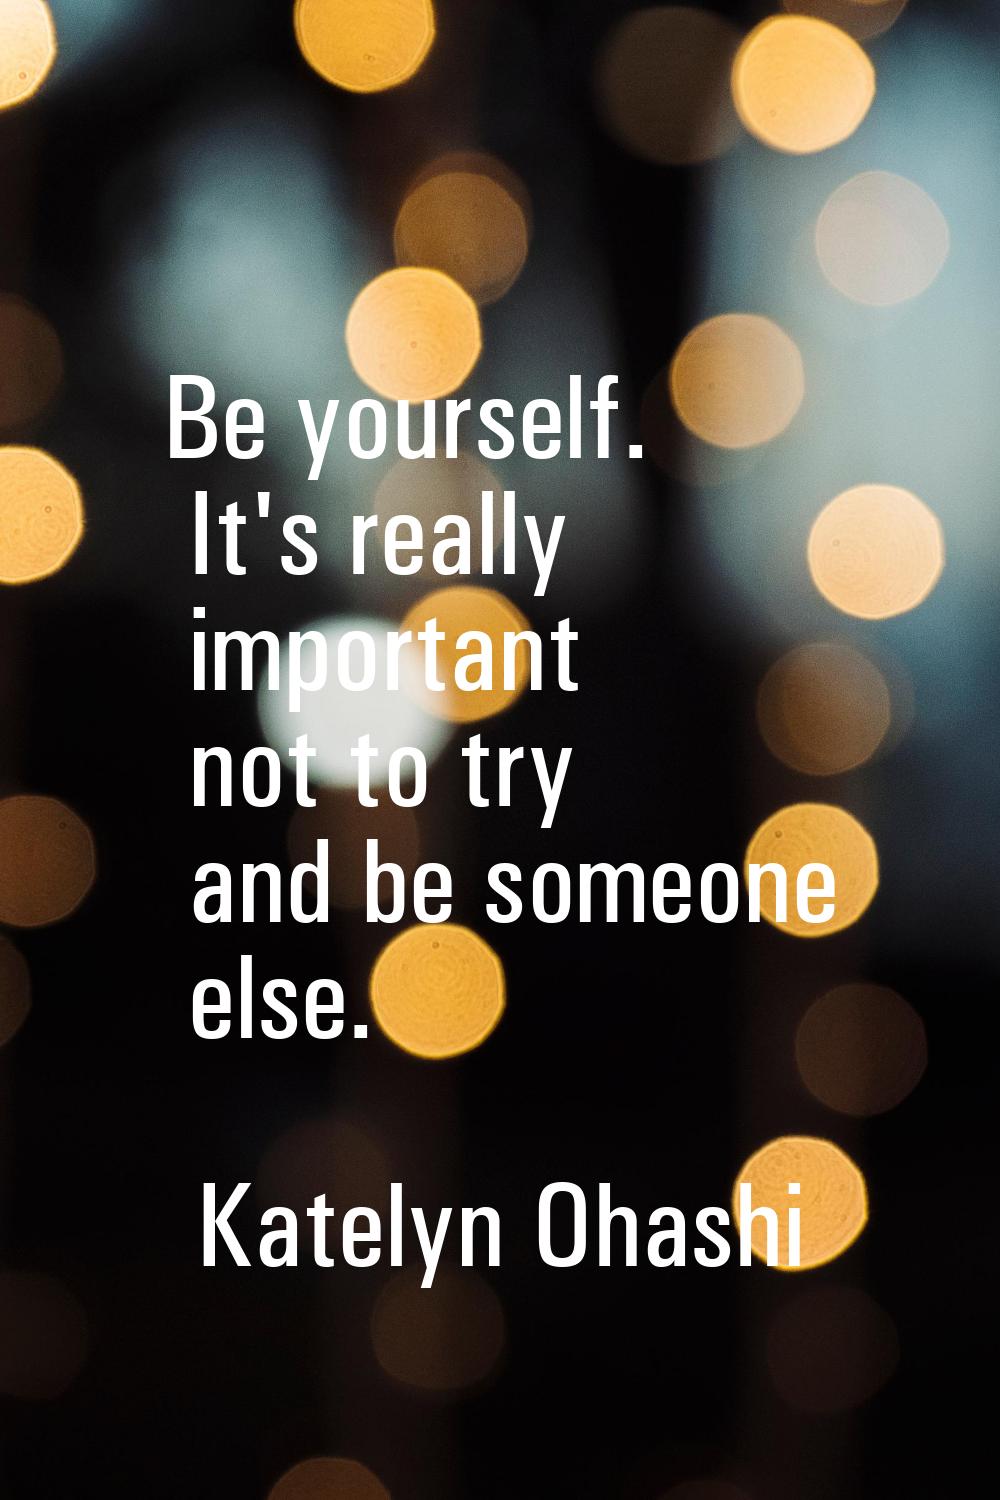 Be yourself. It's really important not to try and be someone else.